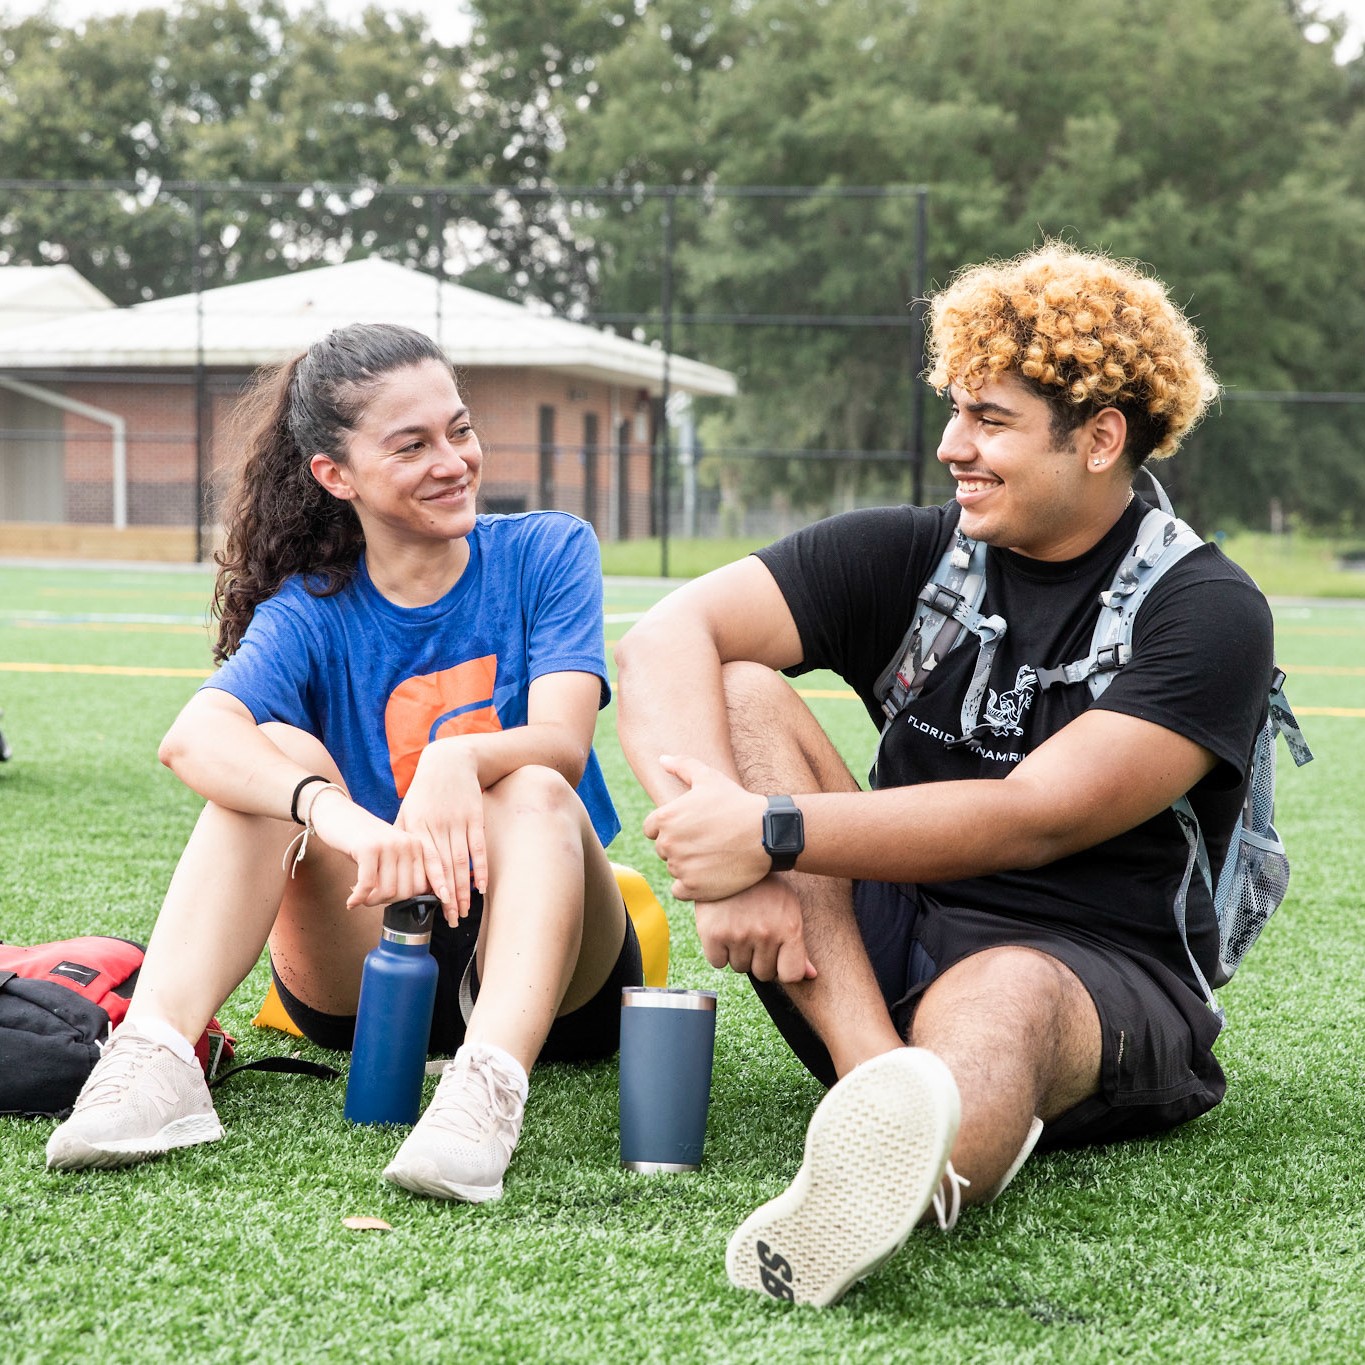 Two students sit on a field and chat.